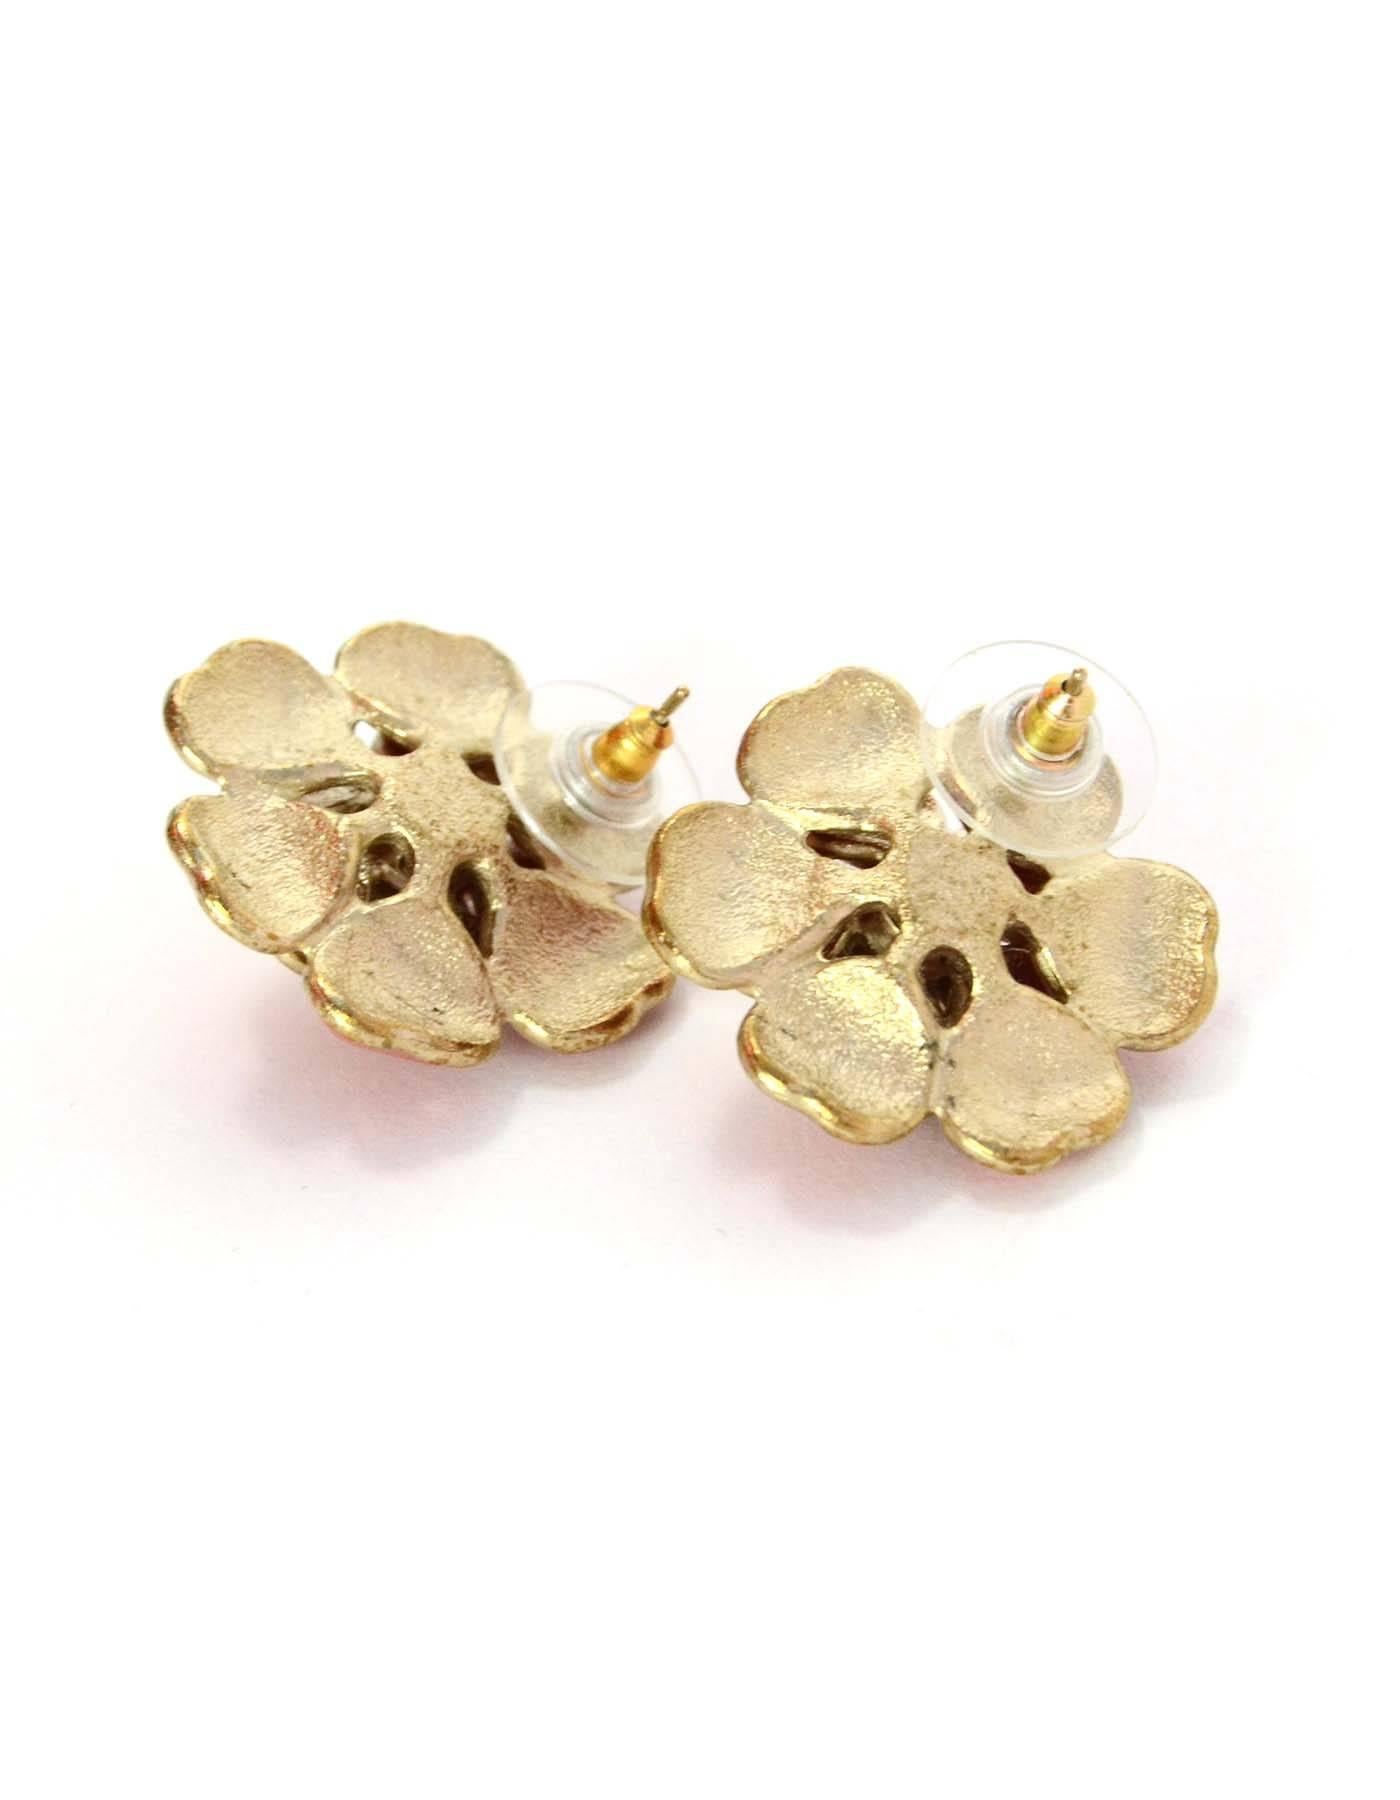 Chanel Pink Enamel Camelia Earrings  
Features crystal clusters in center of flowers and small CC pendants
Color: Pink and goldtone
Materials: Metal, enamel and crystal
Closure: Pierced back
Overall Condition: Excellent pre-owned